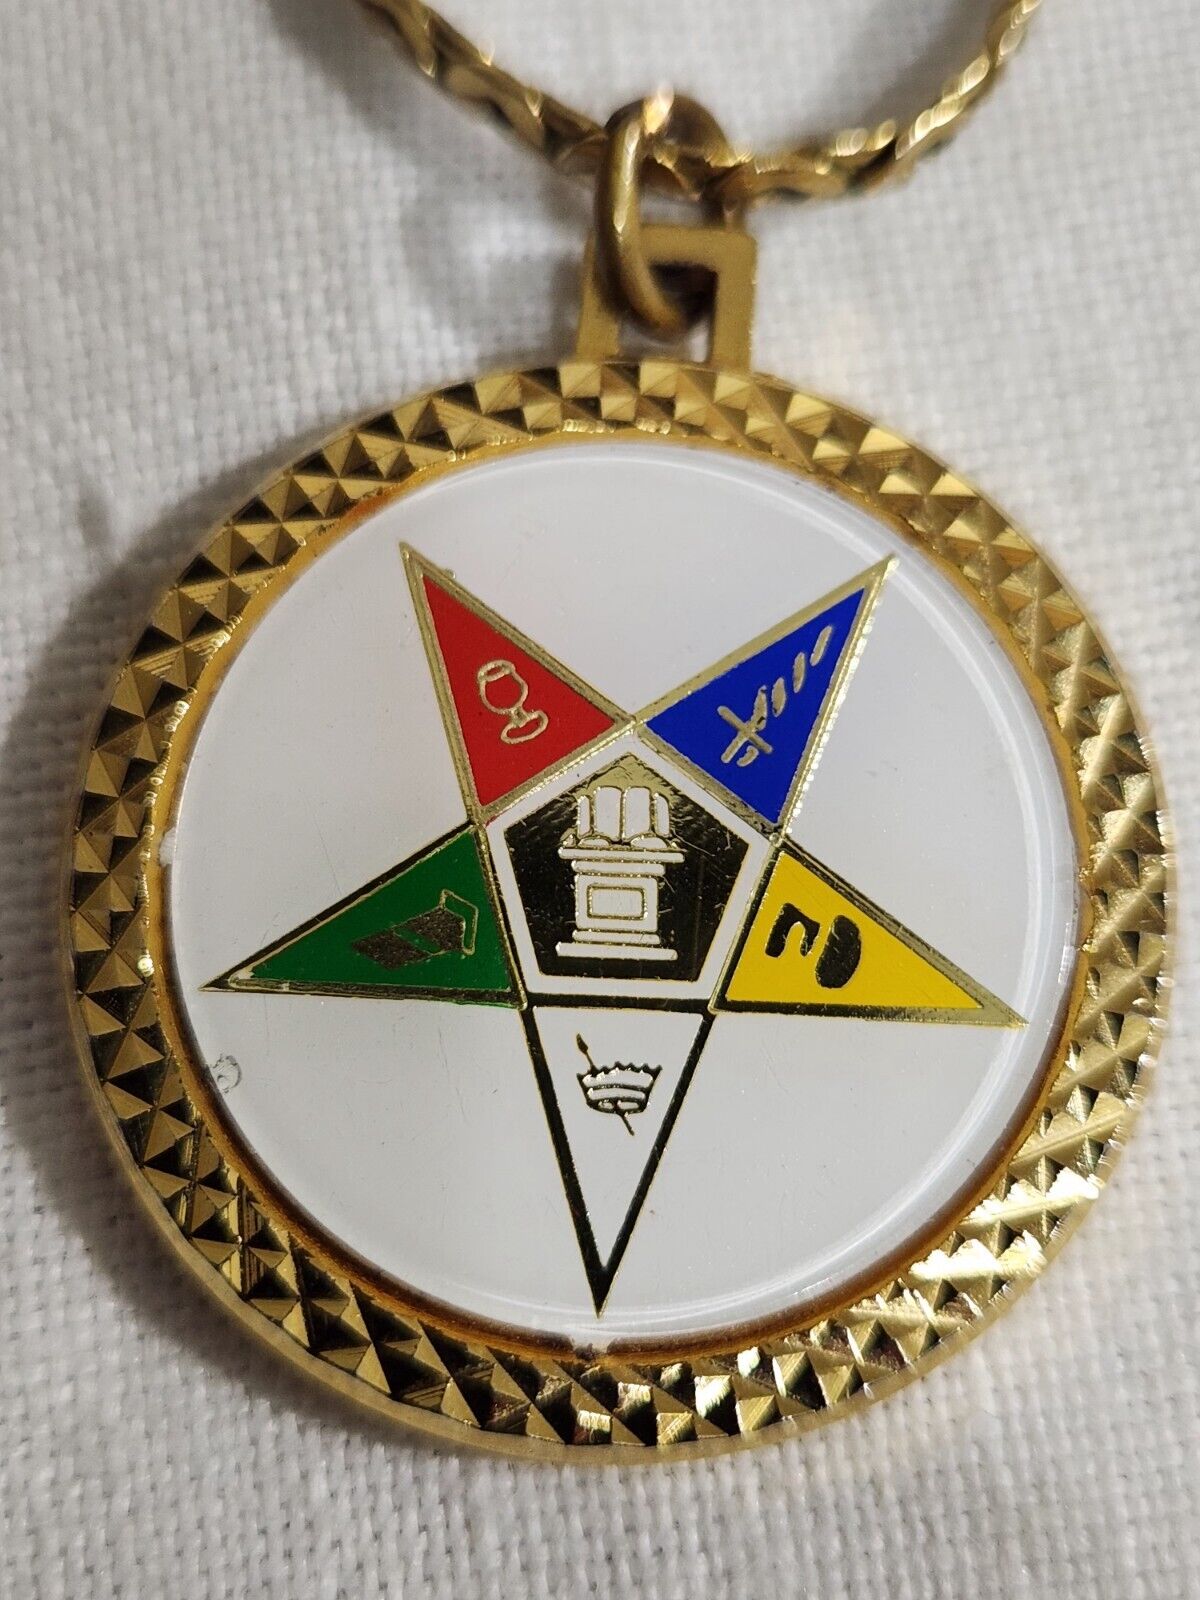 VINTAGE MASONIC EASTERN STAR PENDANT NECKLACE WITH REPLICA GOLD 1776 COIN